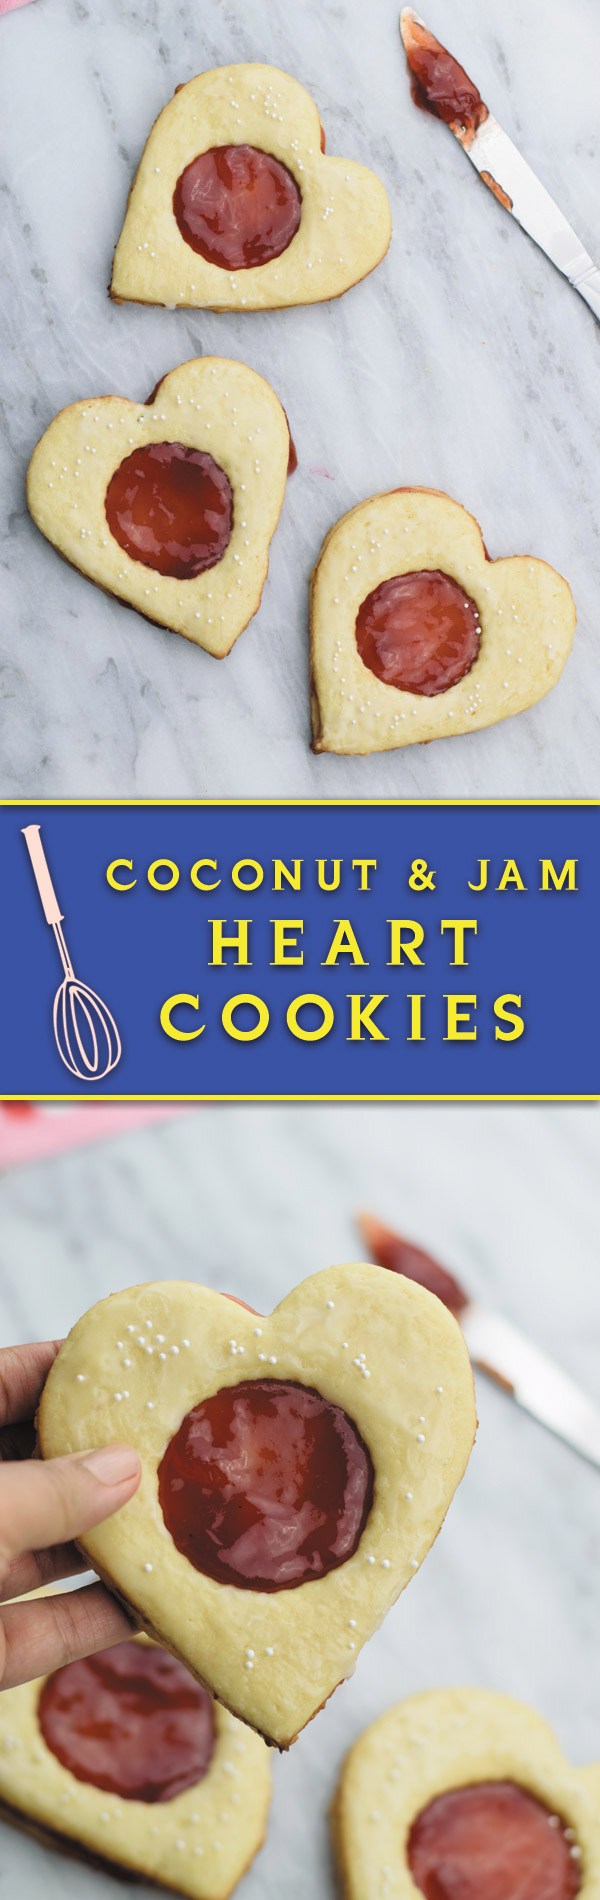 Coconut & jam heart cookies - Coconut cookies with strawberry jam sandwiched in between. Perfect valentines day treat or anytime snack!